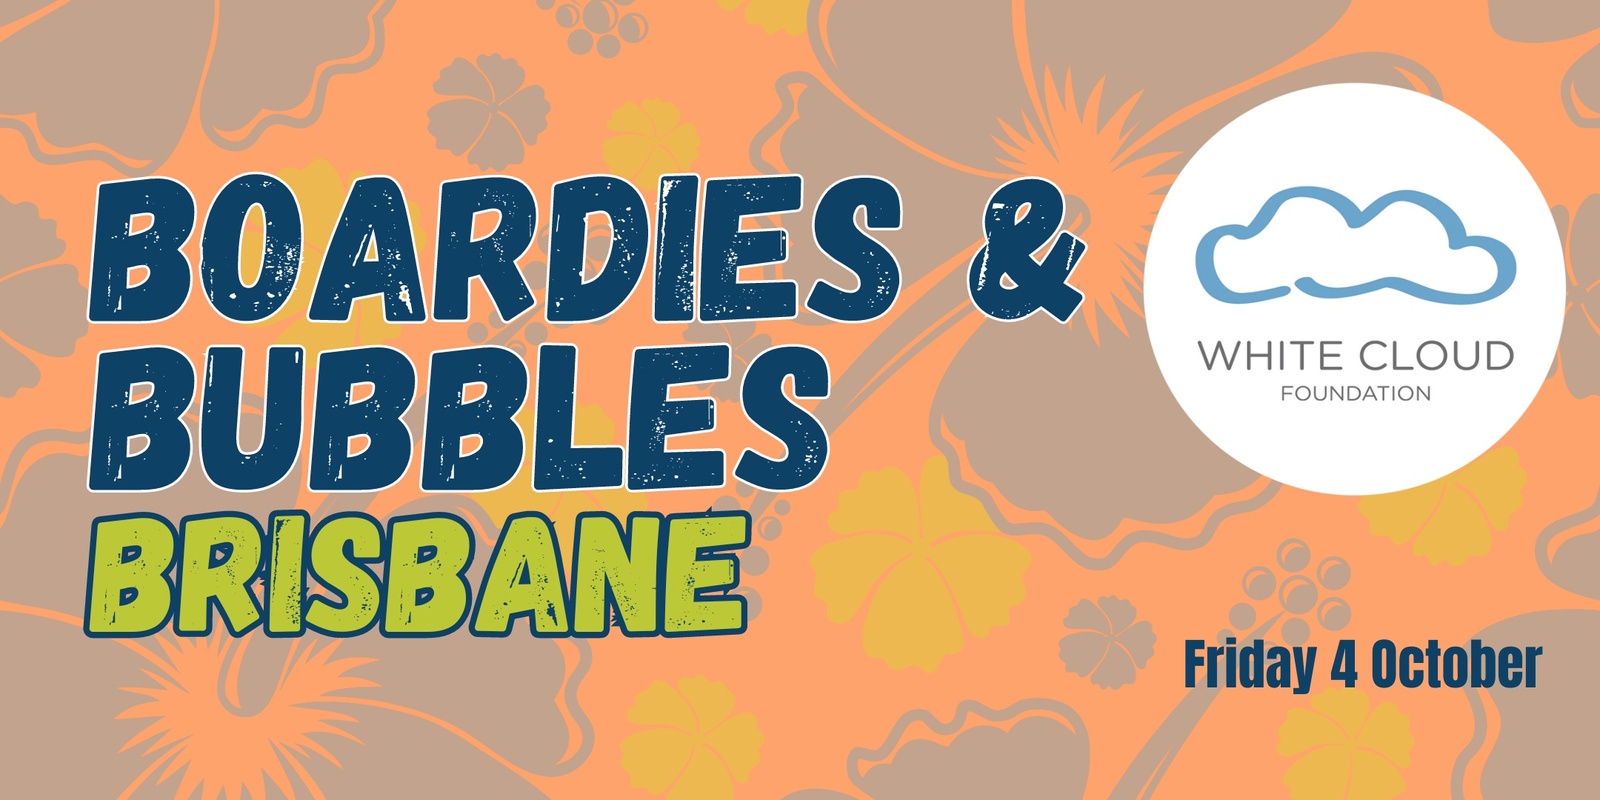 Banner image for Brisbane Boardies & Bubbles Lunch